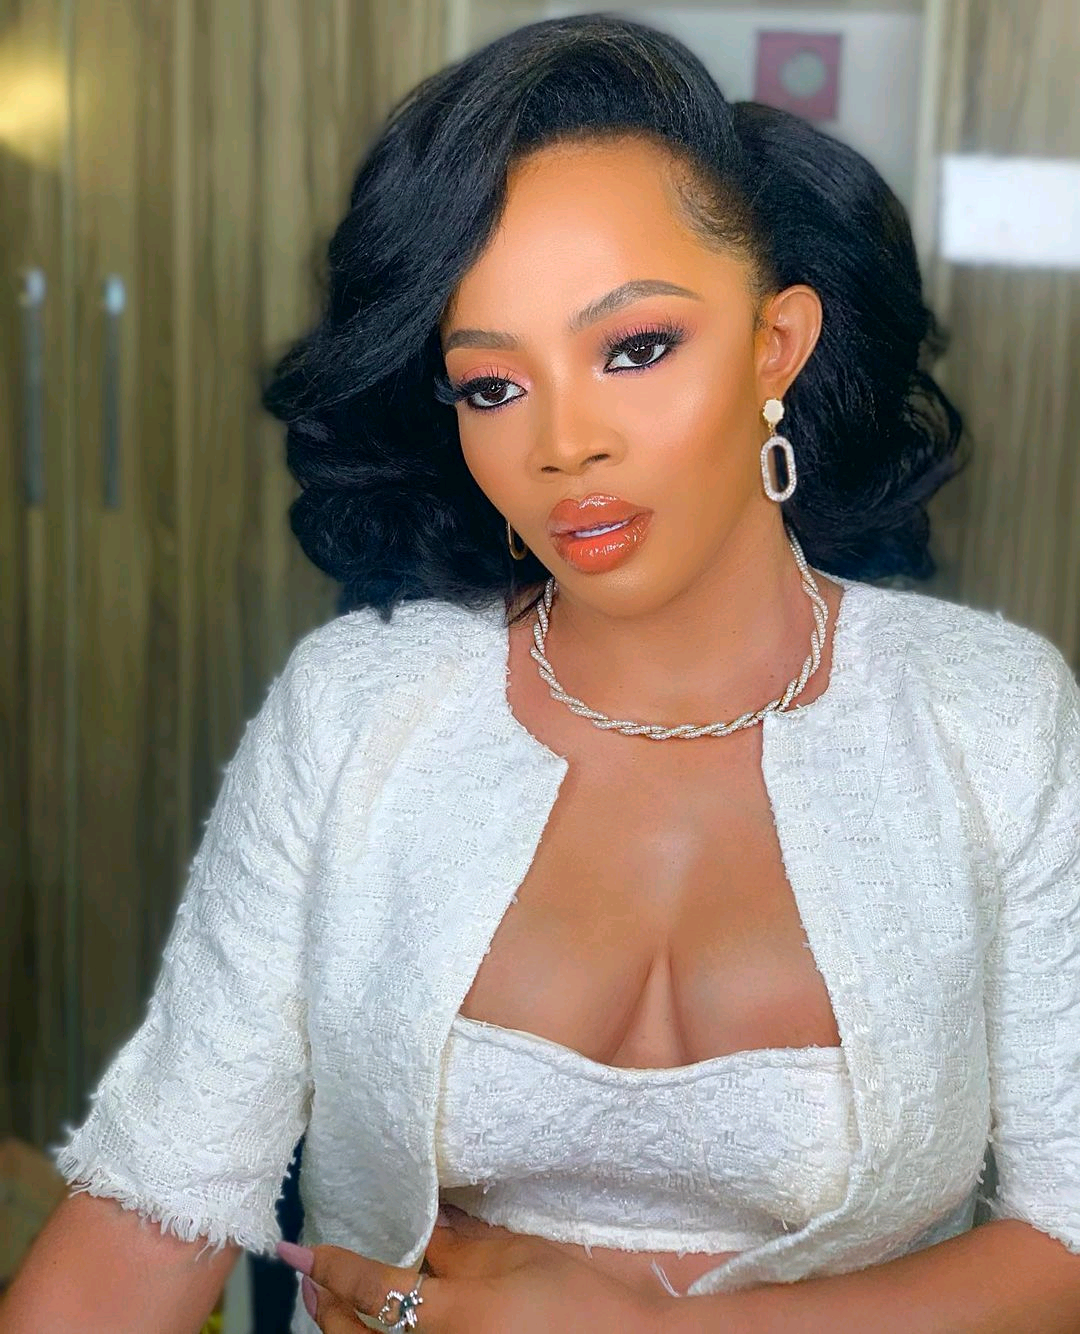 It's Disgusting When People Keep Asking Me When I'm Getting Married - Toke Makinwa